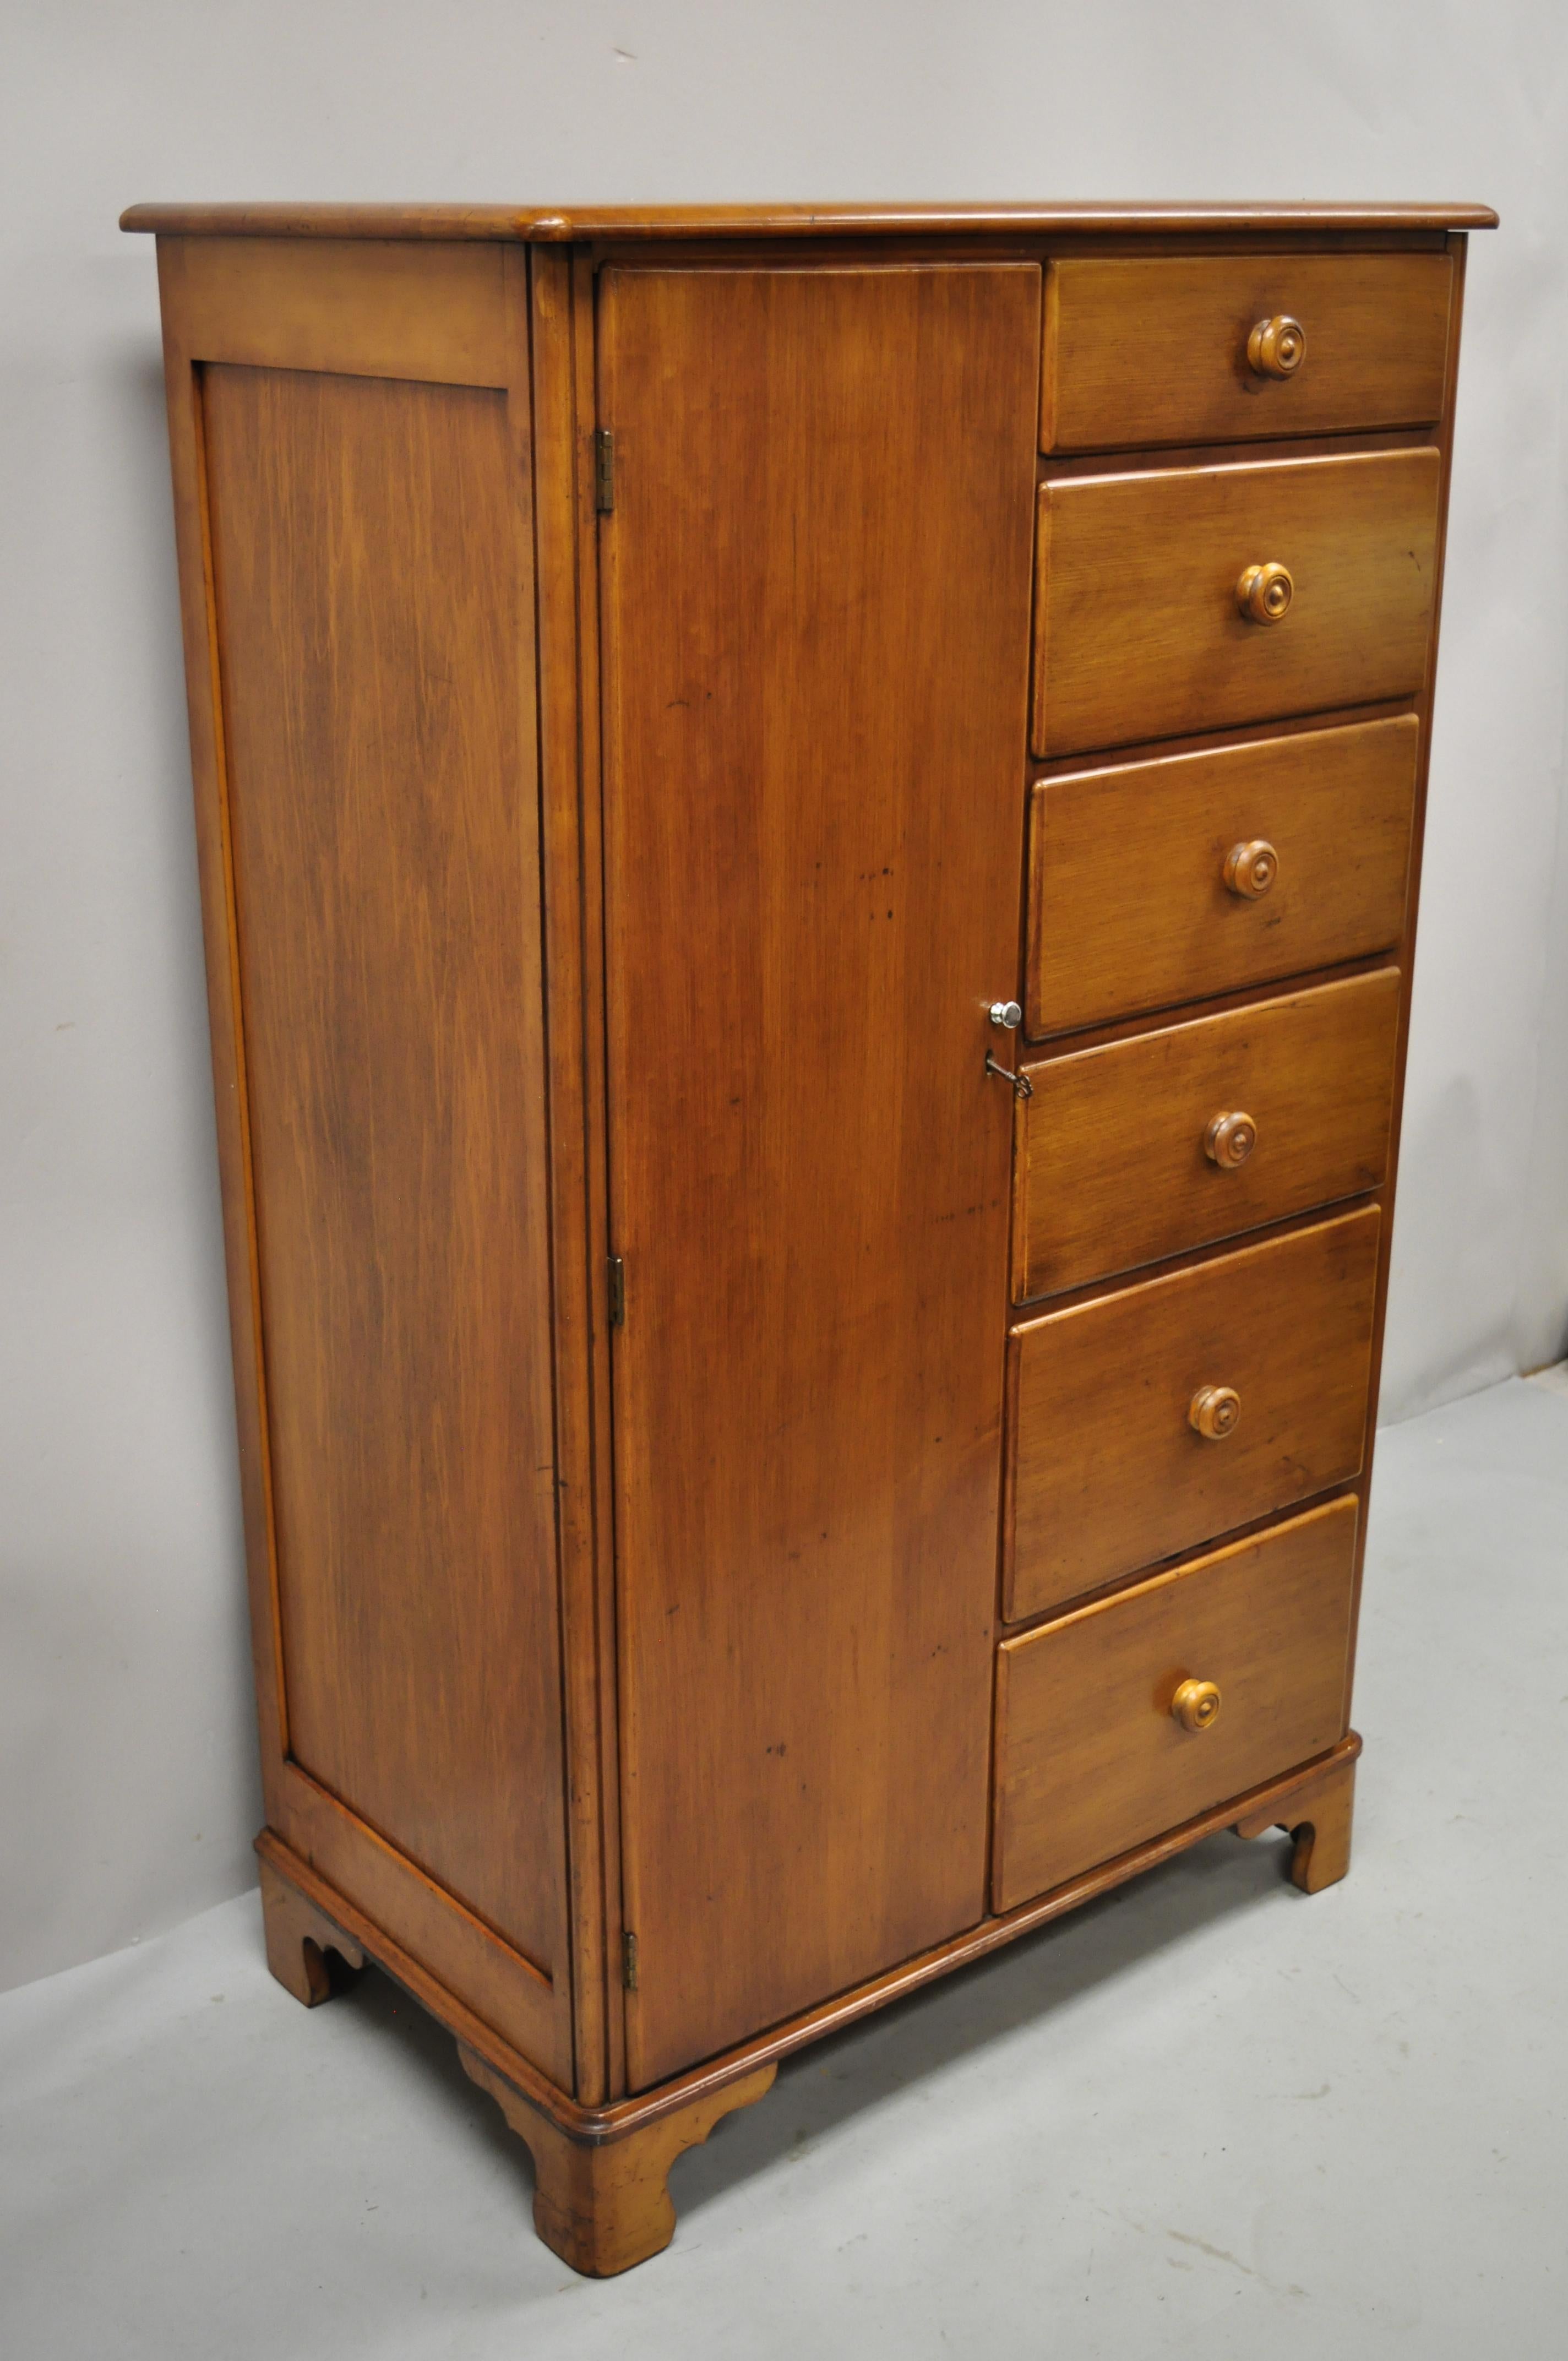 Antique maple wood colonial wardrobe tall chest dresser with 6 drawers and cedar lined cabinet. Item features cedar lined cabinet, solid wood construction, beautiful wood grain, 1 swing door, 6 dovetailed drawers, very nice antique item, great style